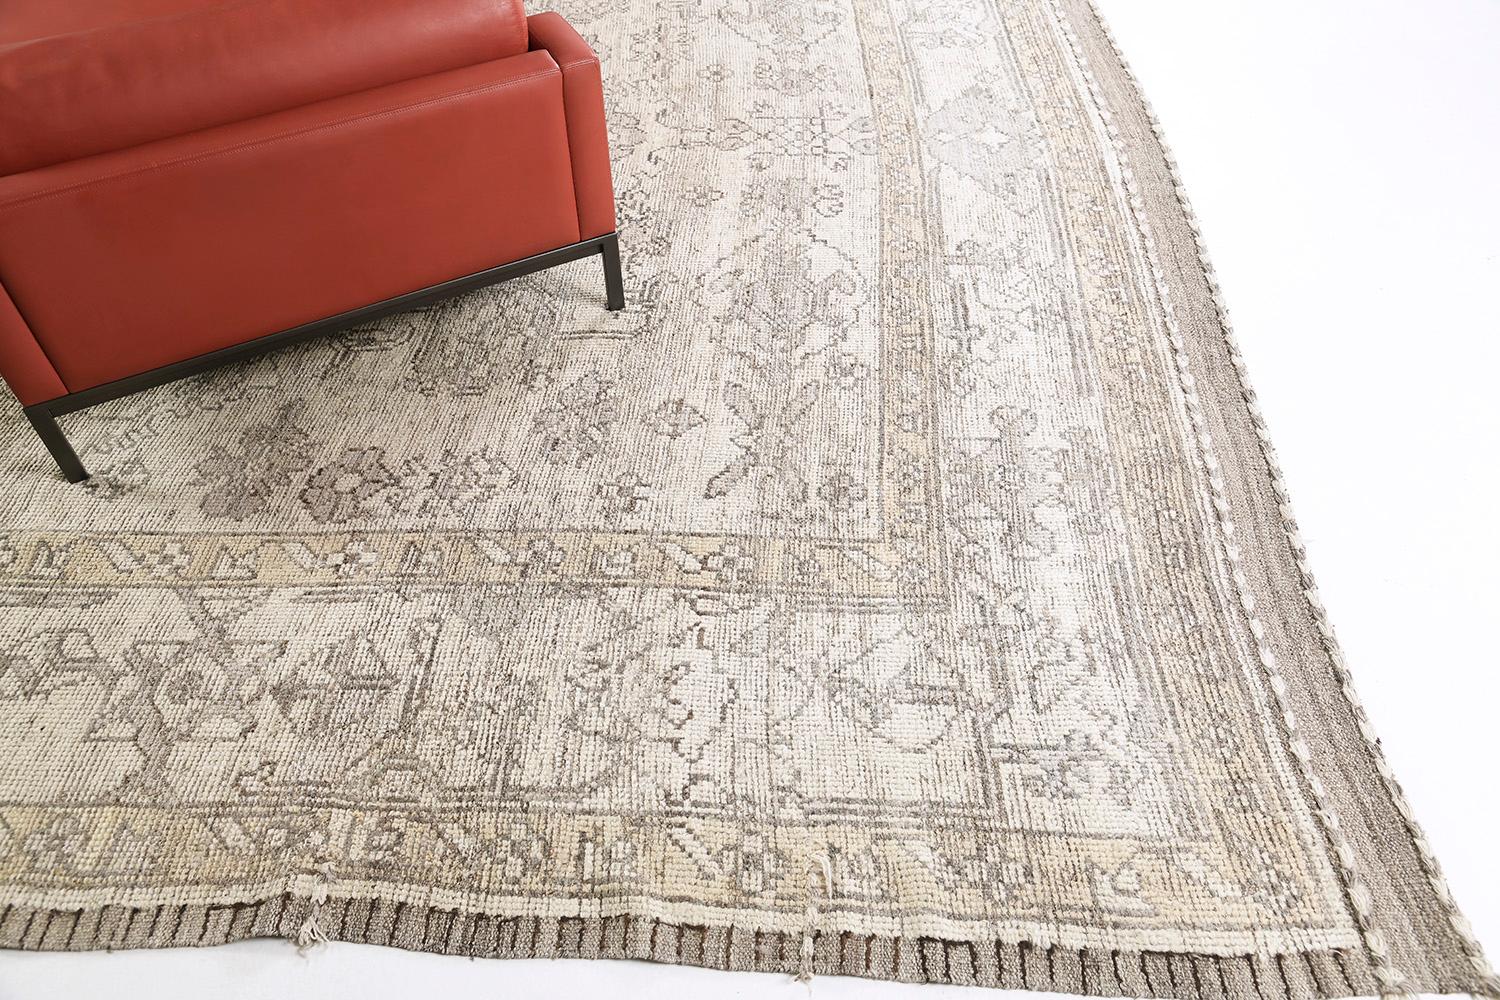 This dashing hand-spun wool revival of Oushak rug features all stylized symbolic elements and medallions are embodied with this design. It creates a soulful balance of everything from mid-century modern decor to old-fashioned design through a